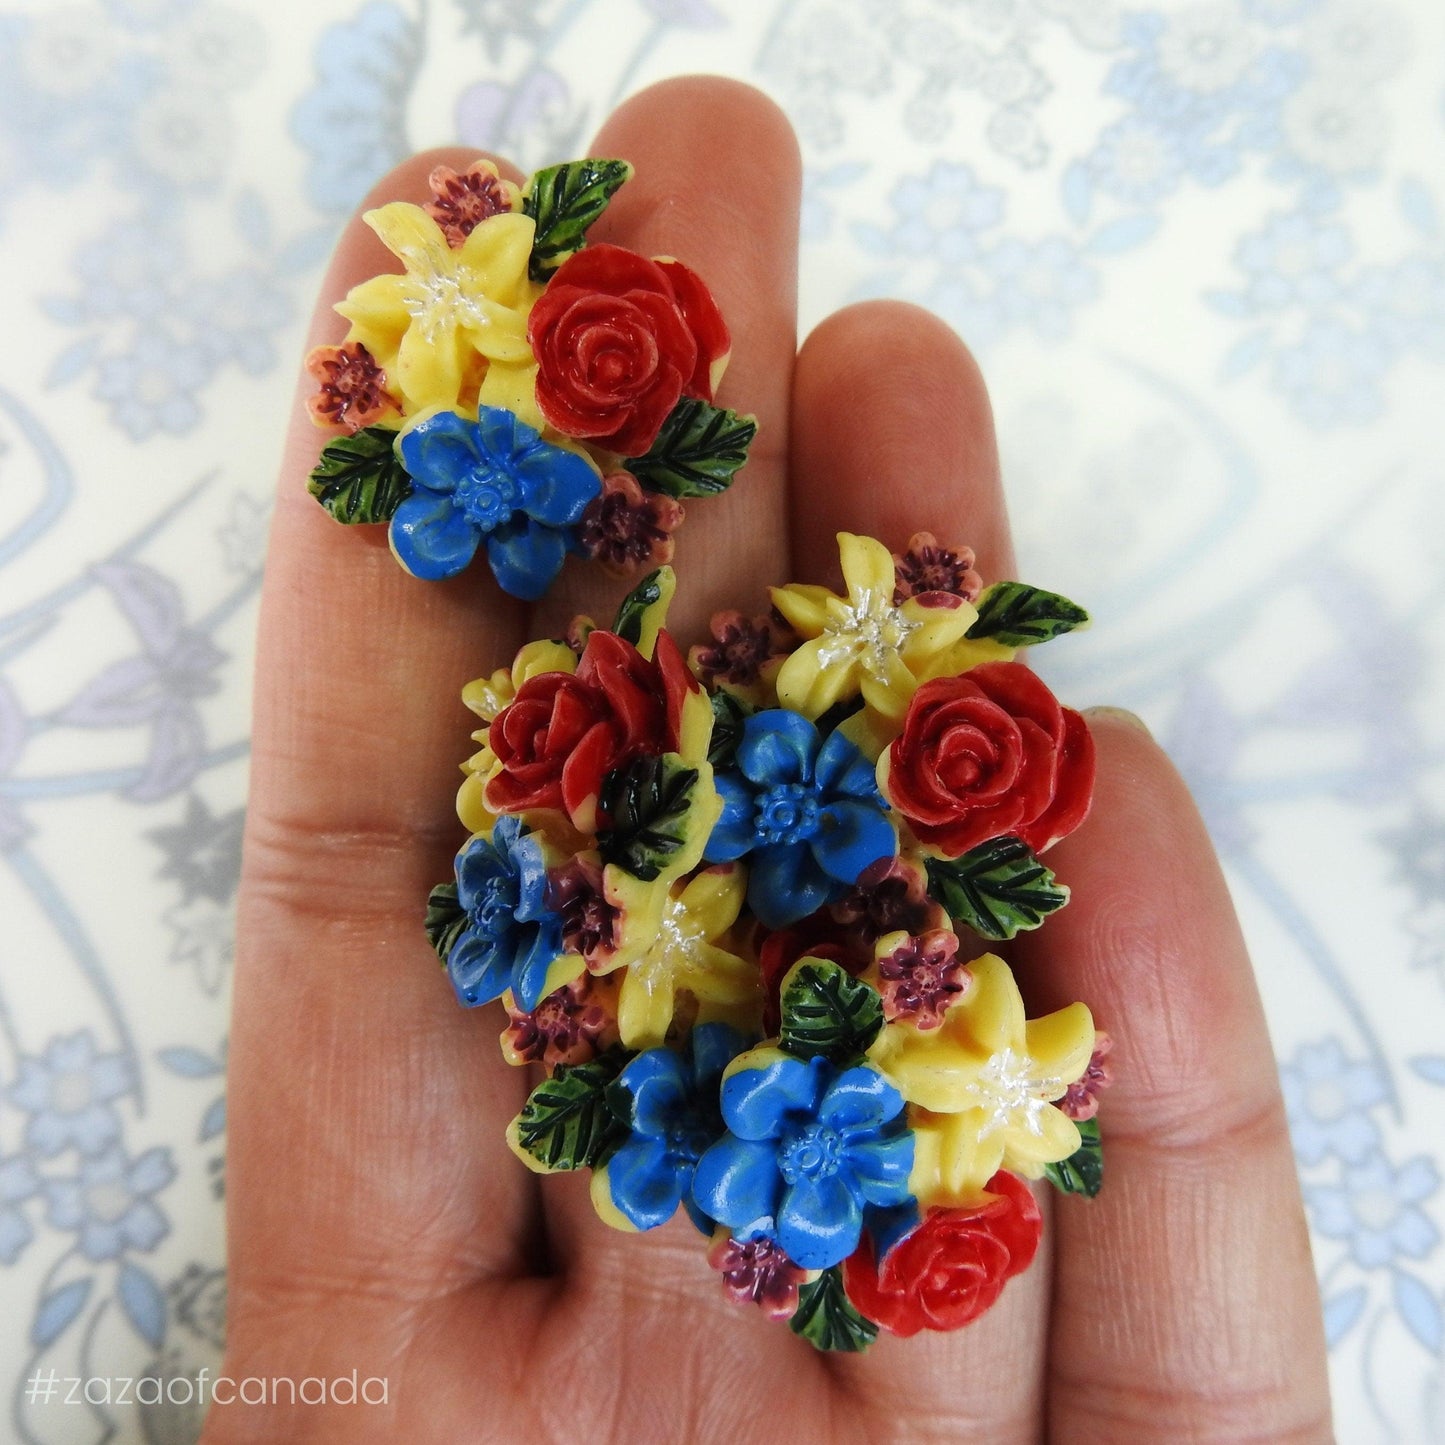 Fancy buttons flower shaped, painted and colored with a nice multidimensional design, for decorative jewelry making and flower sewing DIY